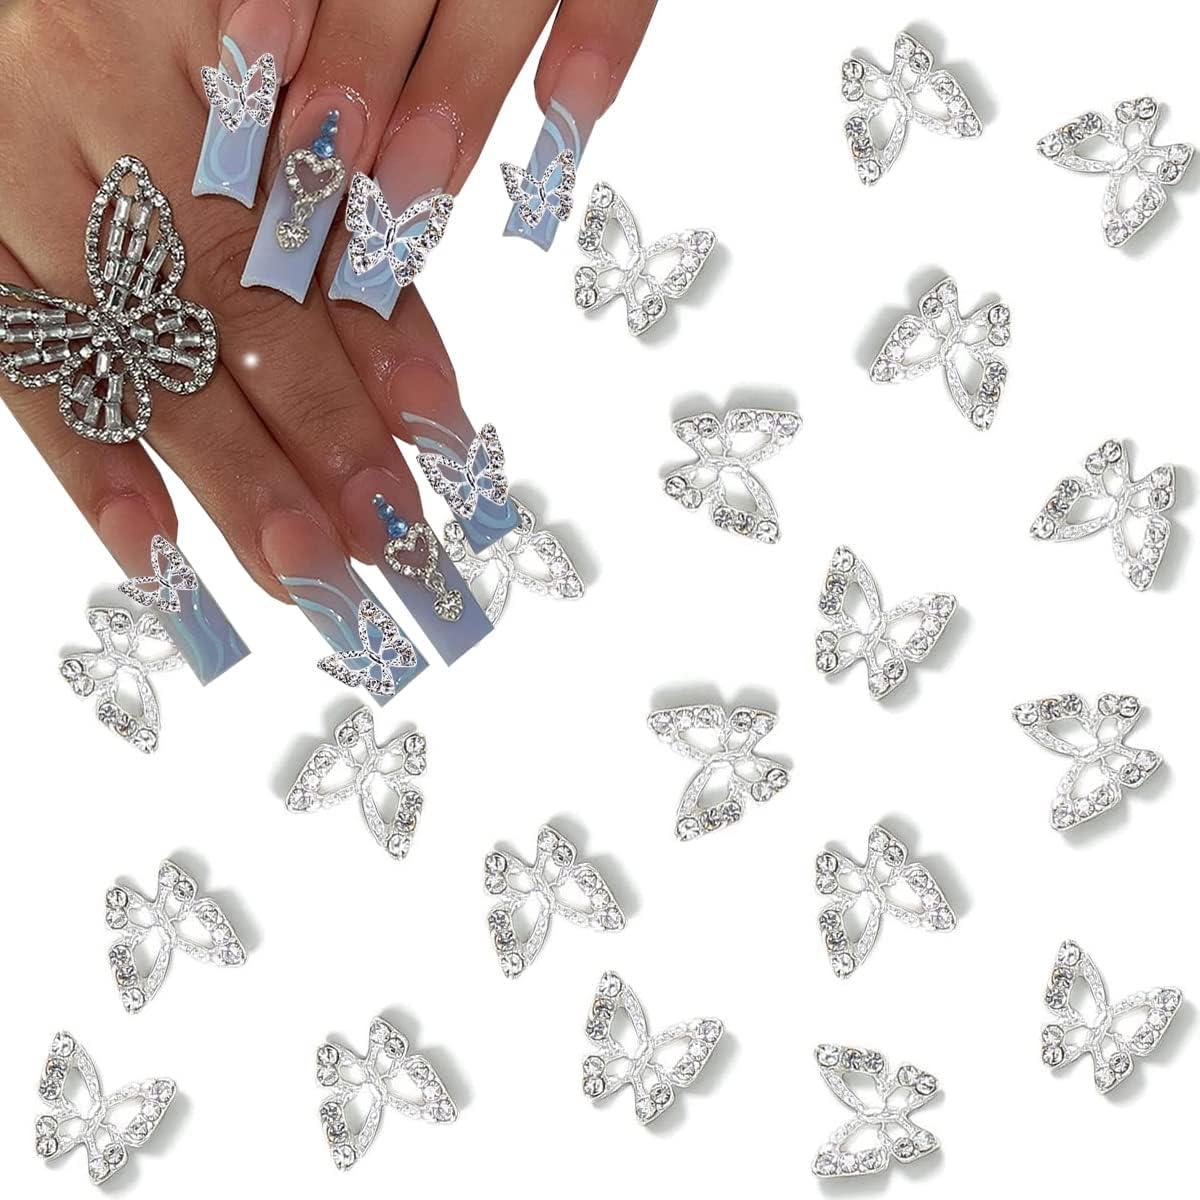  DANNEASY 12pcs Butterfly Nail Charms 3D Gold Silver